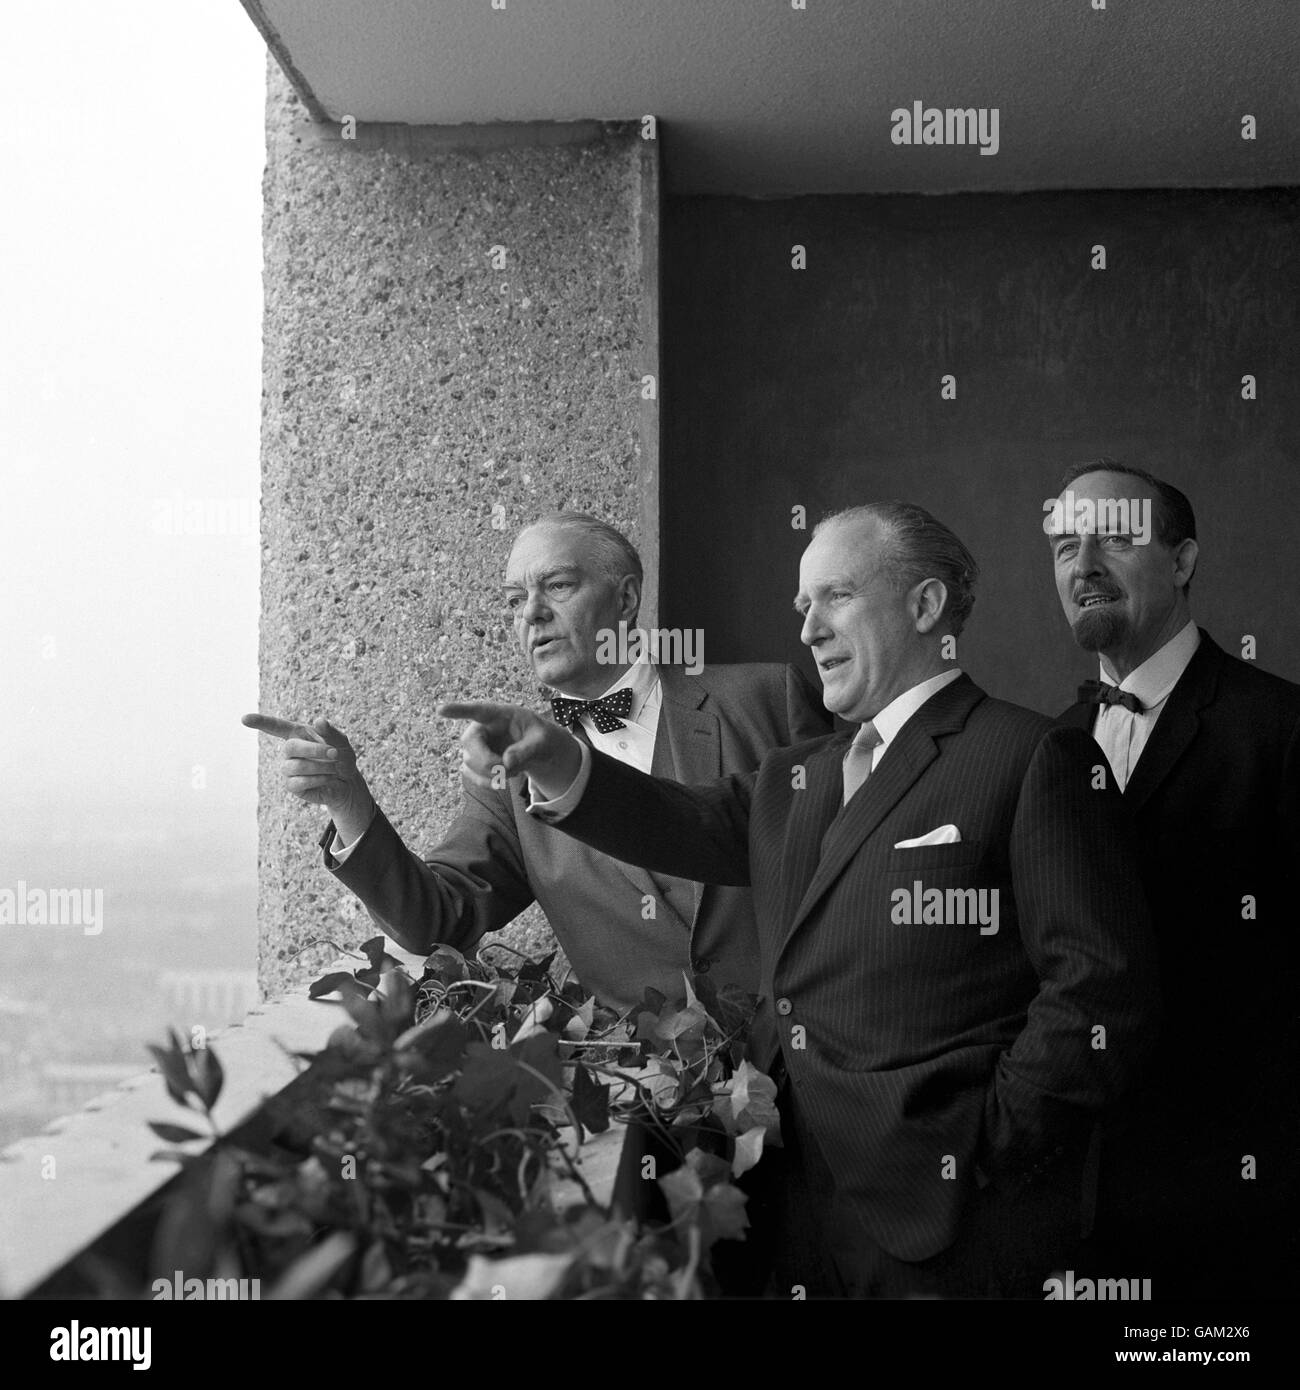 Erno Goldfinger, left, the architect who designed the block and is now living there, shows some guests the view from his flat in the 26 storey block of flats, Balfron Tower, Poplar, London. Left to right, Erno Goldfinger, Desmond Plummer, Leader of the Greater London Council, Horace Cutler, chairman of the Housing Committee. The architect has taken a four roomed flat as a sociological experiment. He will study the living conditions he has produced for GLC tenants and use the experience gained when designing further homes. Stock Photo